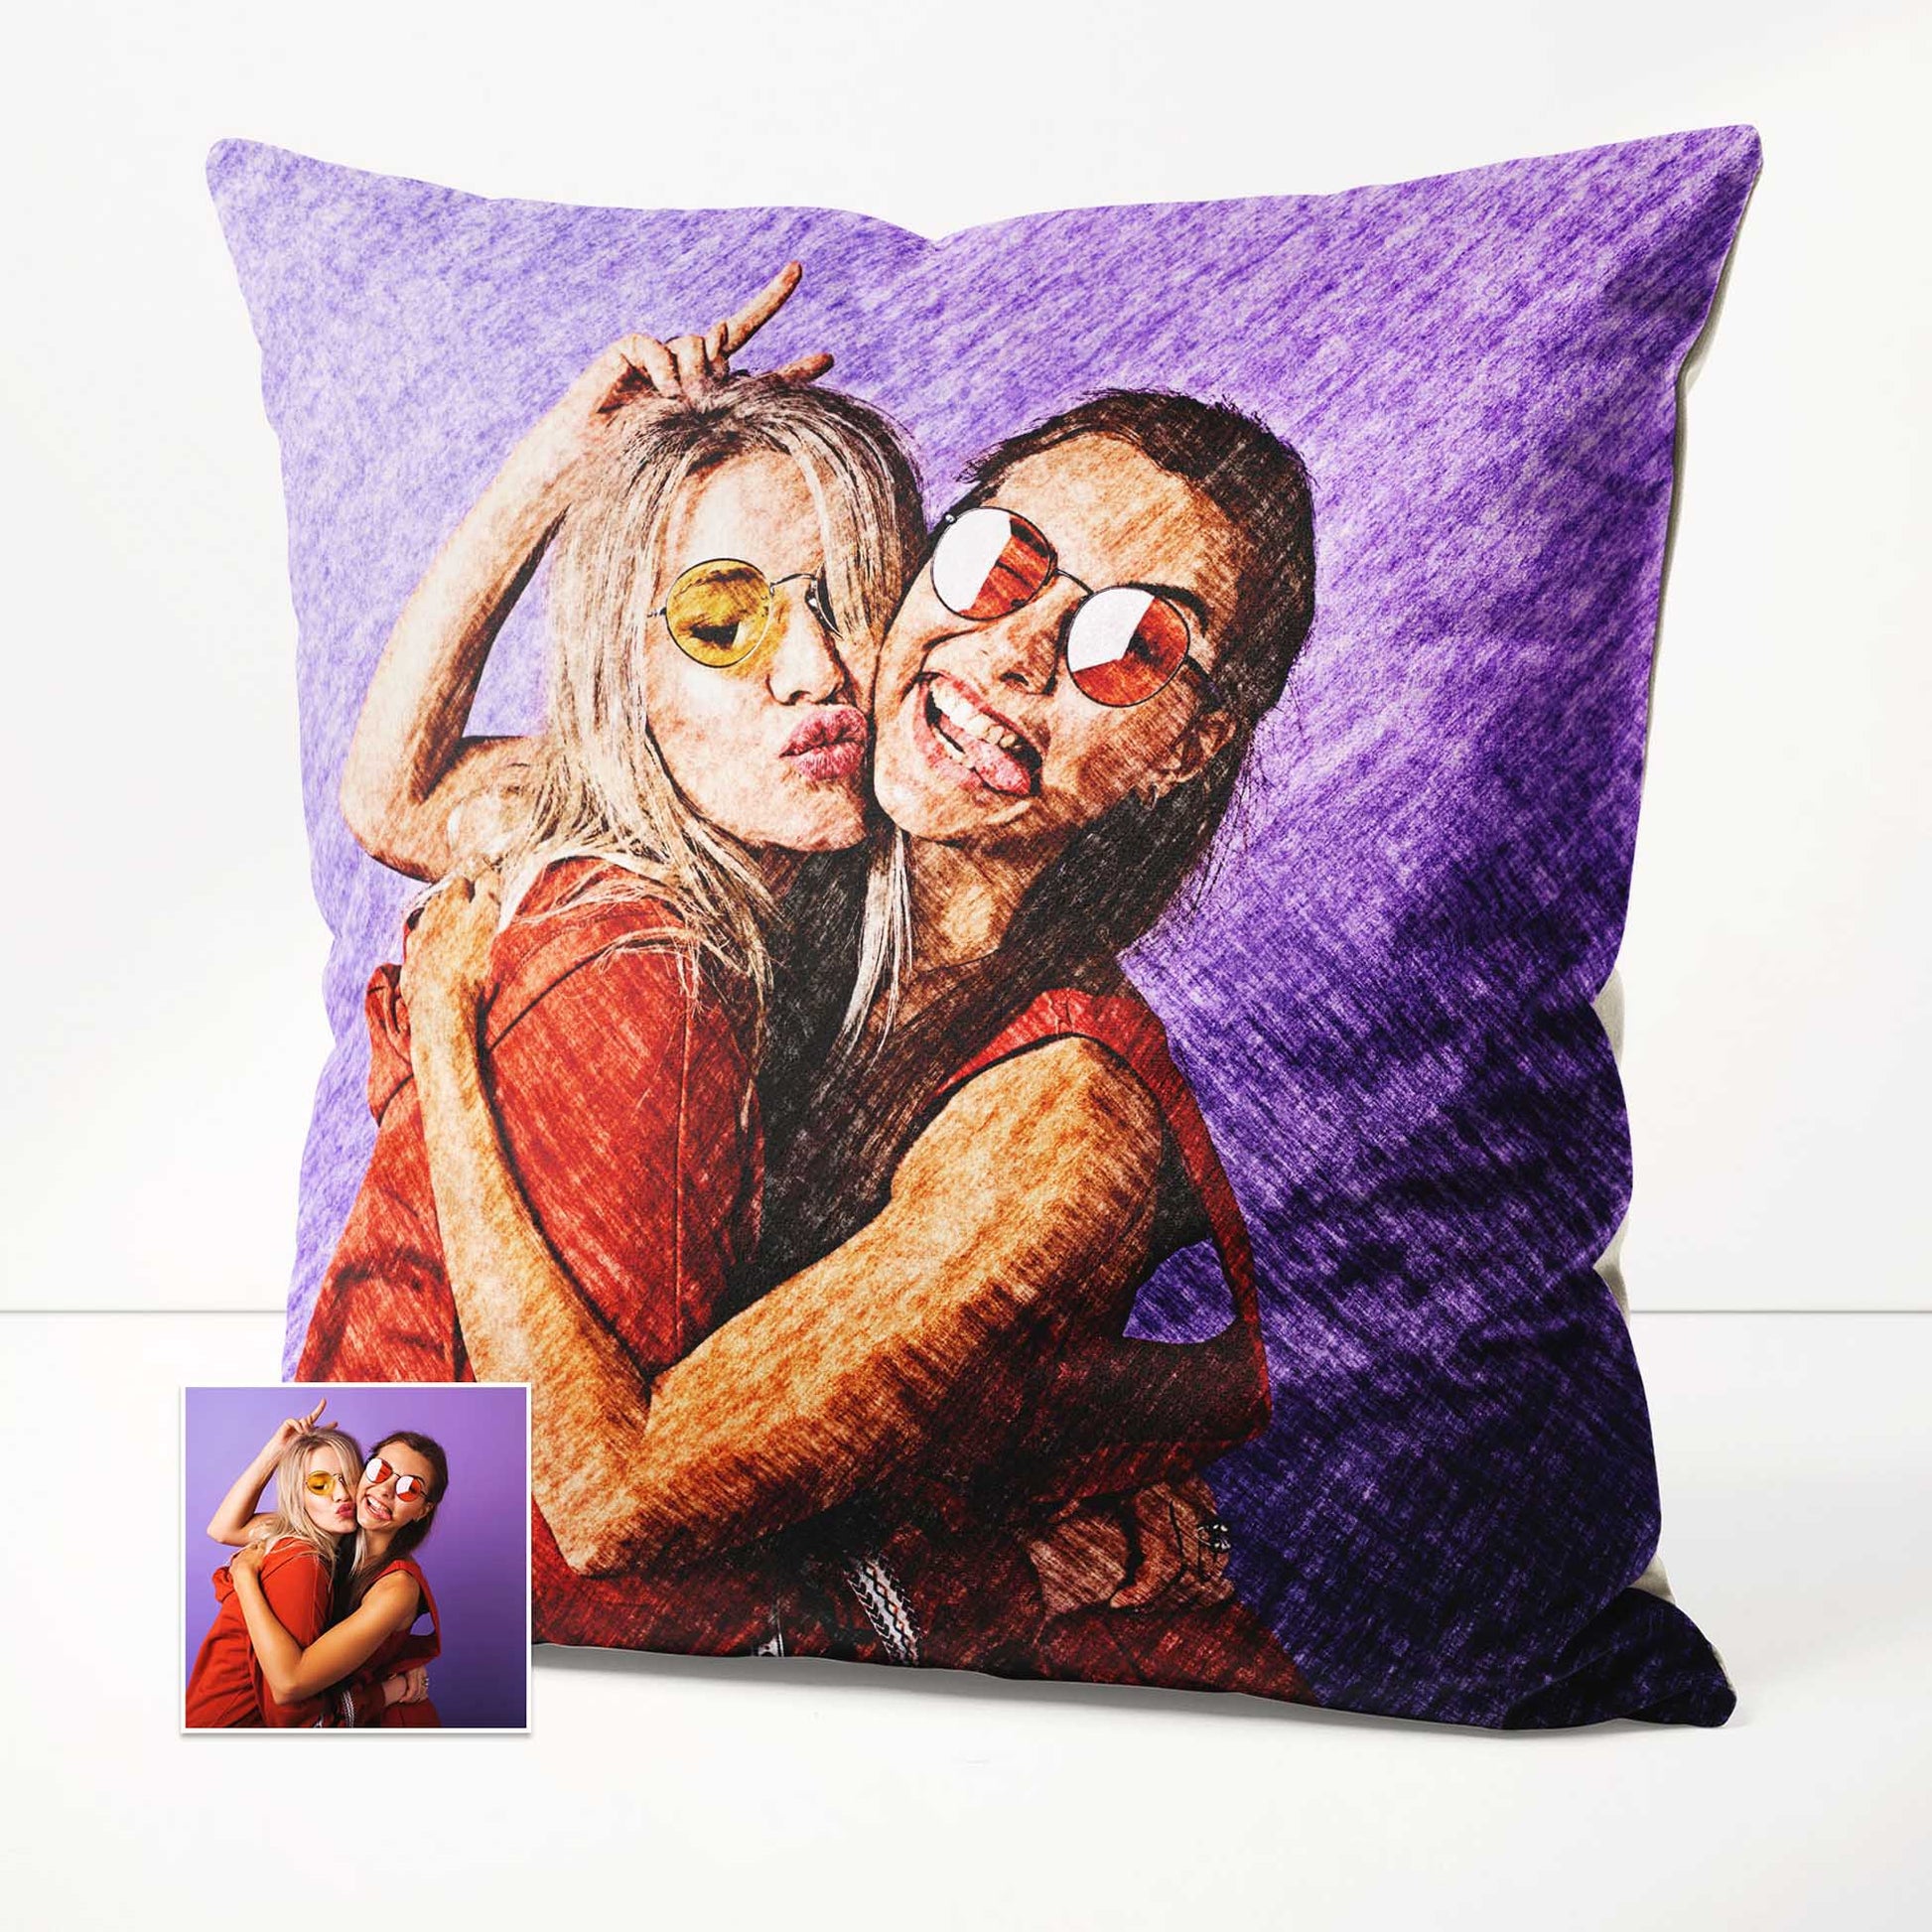 Elevate your space with the elegance of a Personalised Charcoal Drawing Cushion. Handmade with attention to detail and crafted from soft velvet, it offers a luxurious and relaxing experience. Capture the natural and real essence of photos